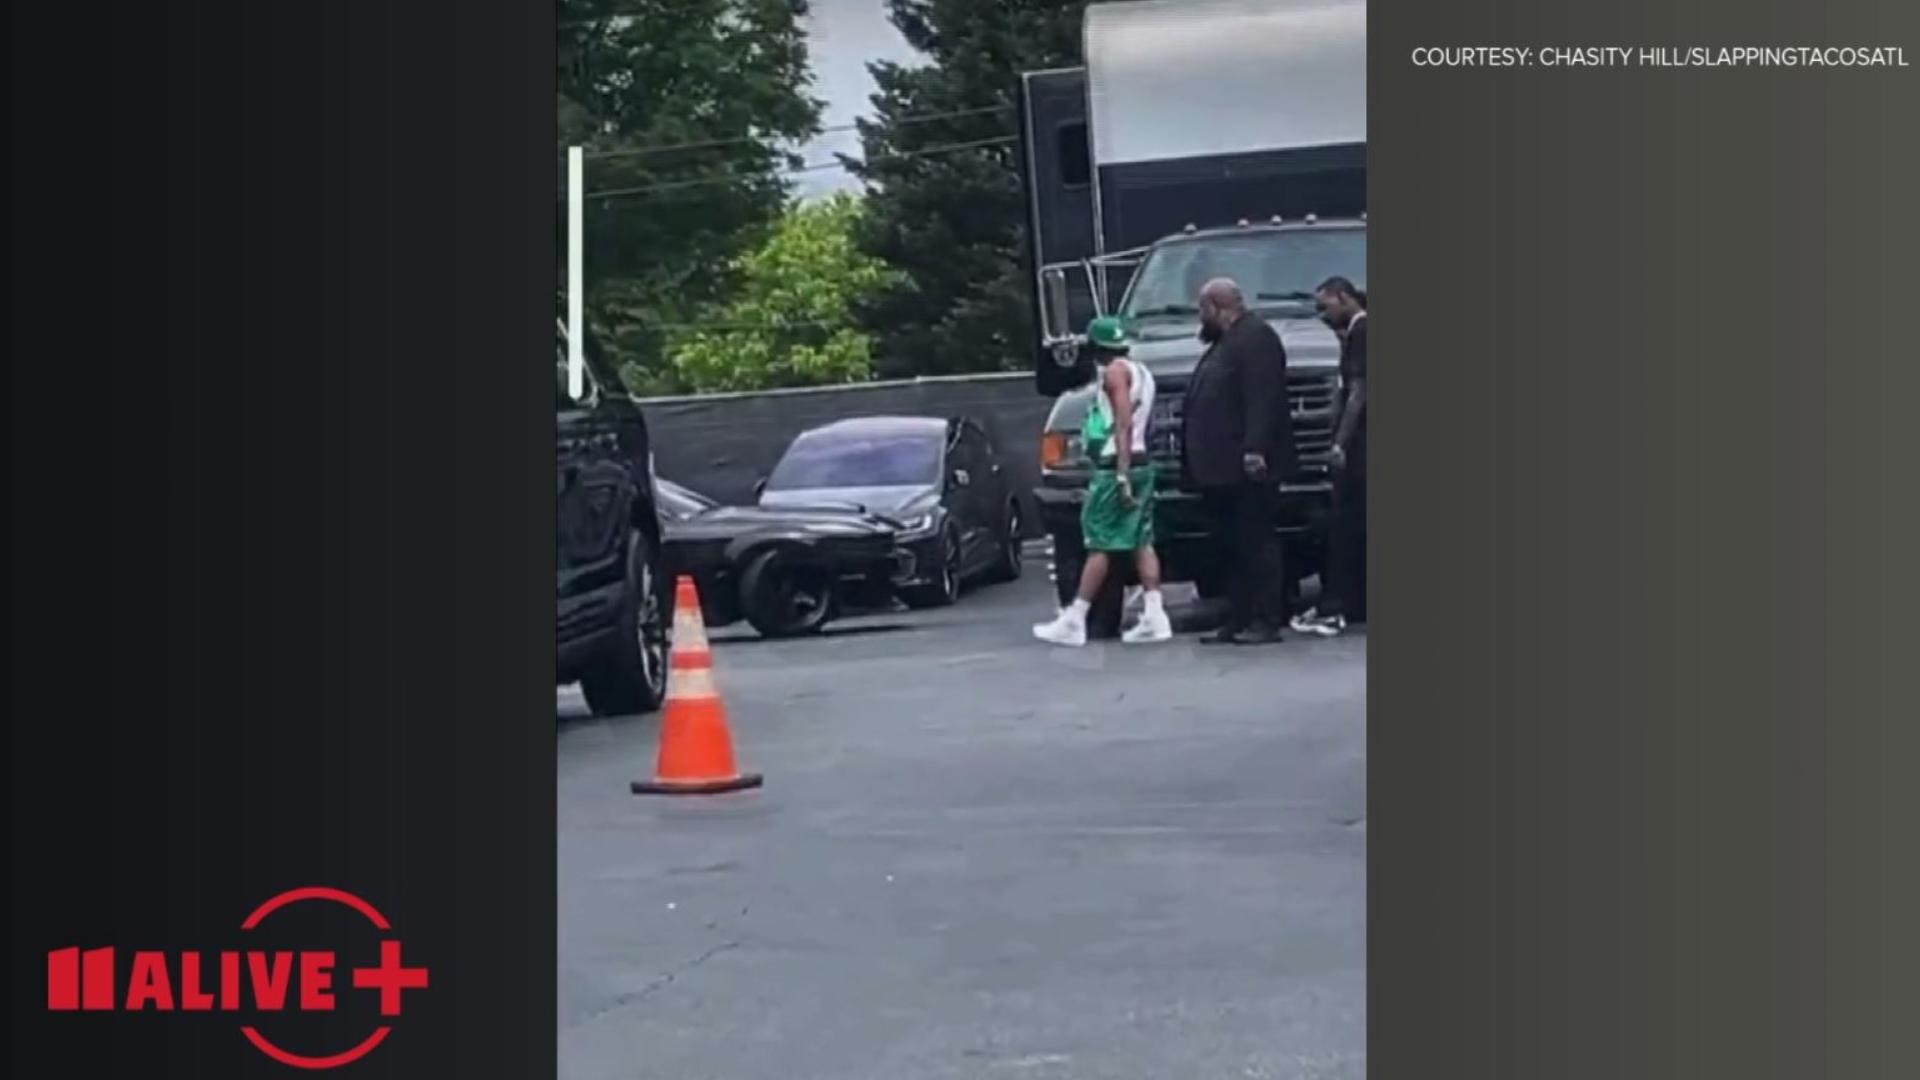 Three people were shot in northwest Atlanta, where a music video was being filmed. Witnesses saw Lil Baby in the area but said he was not shot.